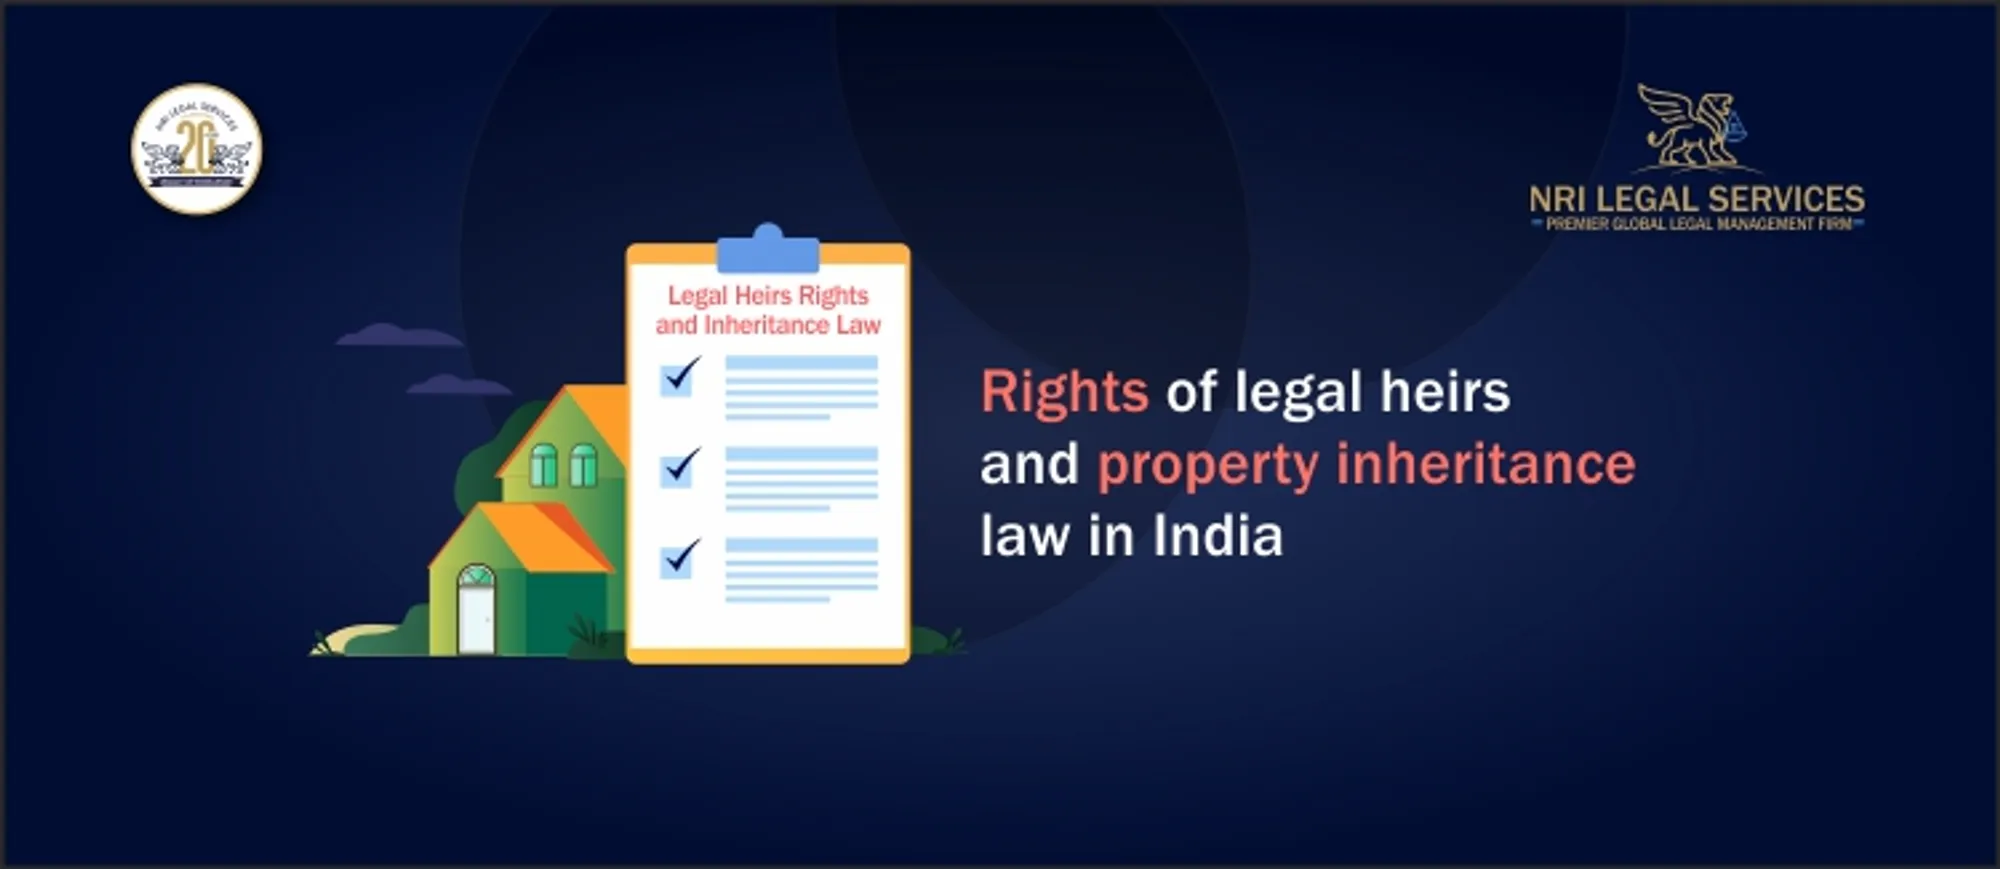 Rights of legal heirs and property inheritance law in India